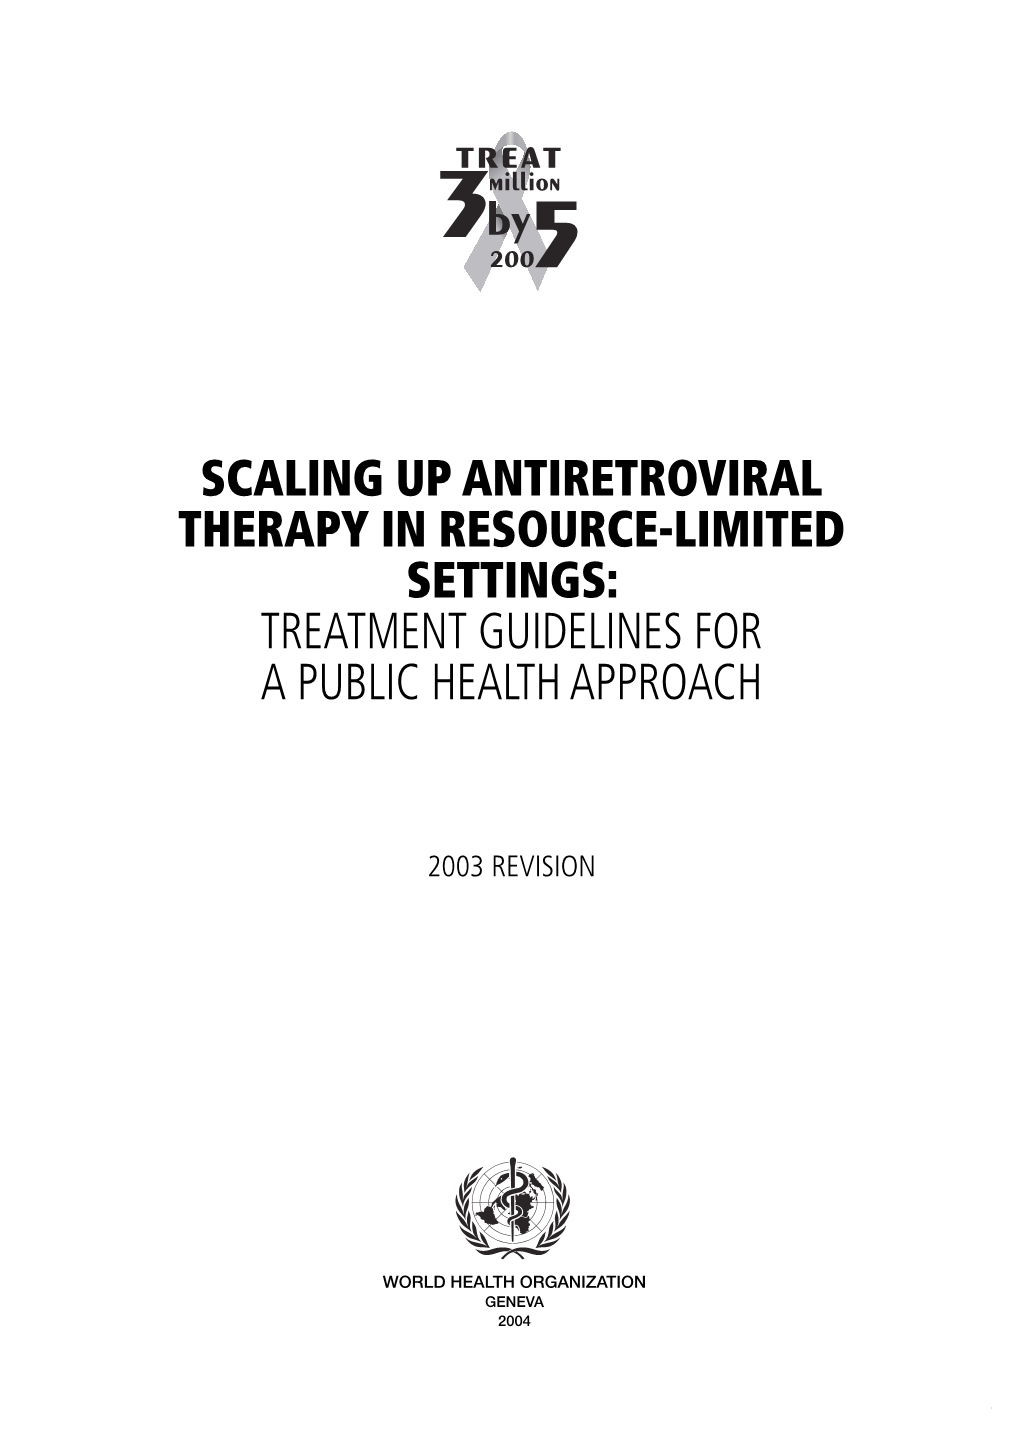 Scaling up Antiretroviral Therapy in Resource-Limited Settings: Treatment Guidelines for a Public Health Approach